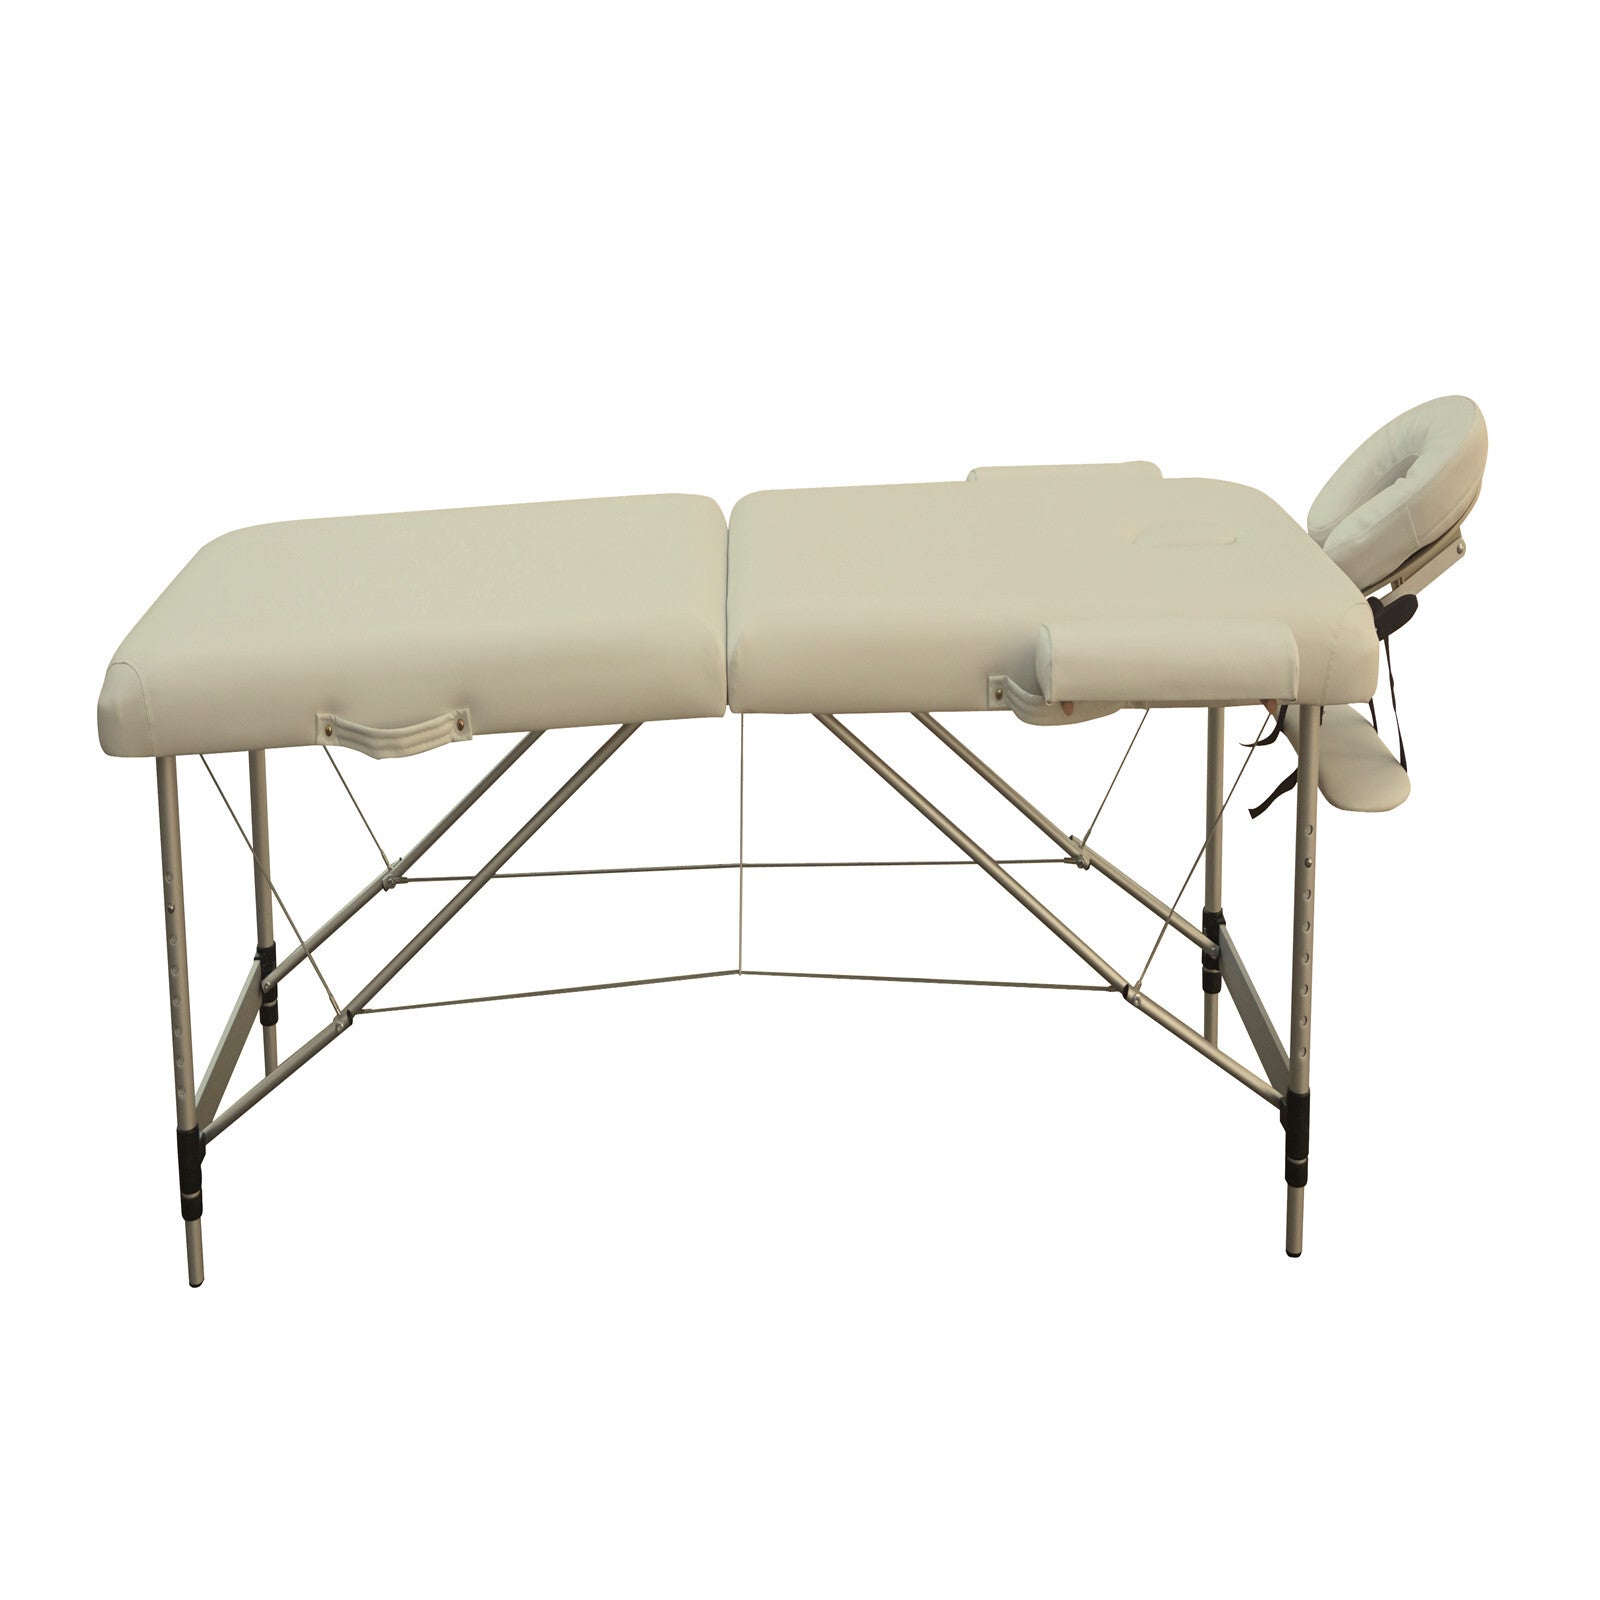 2 Fold Portable Aluminium Massage Table Massage Bed Beauty Therapy Beige - SILBERSHELL